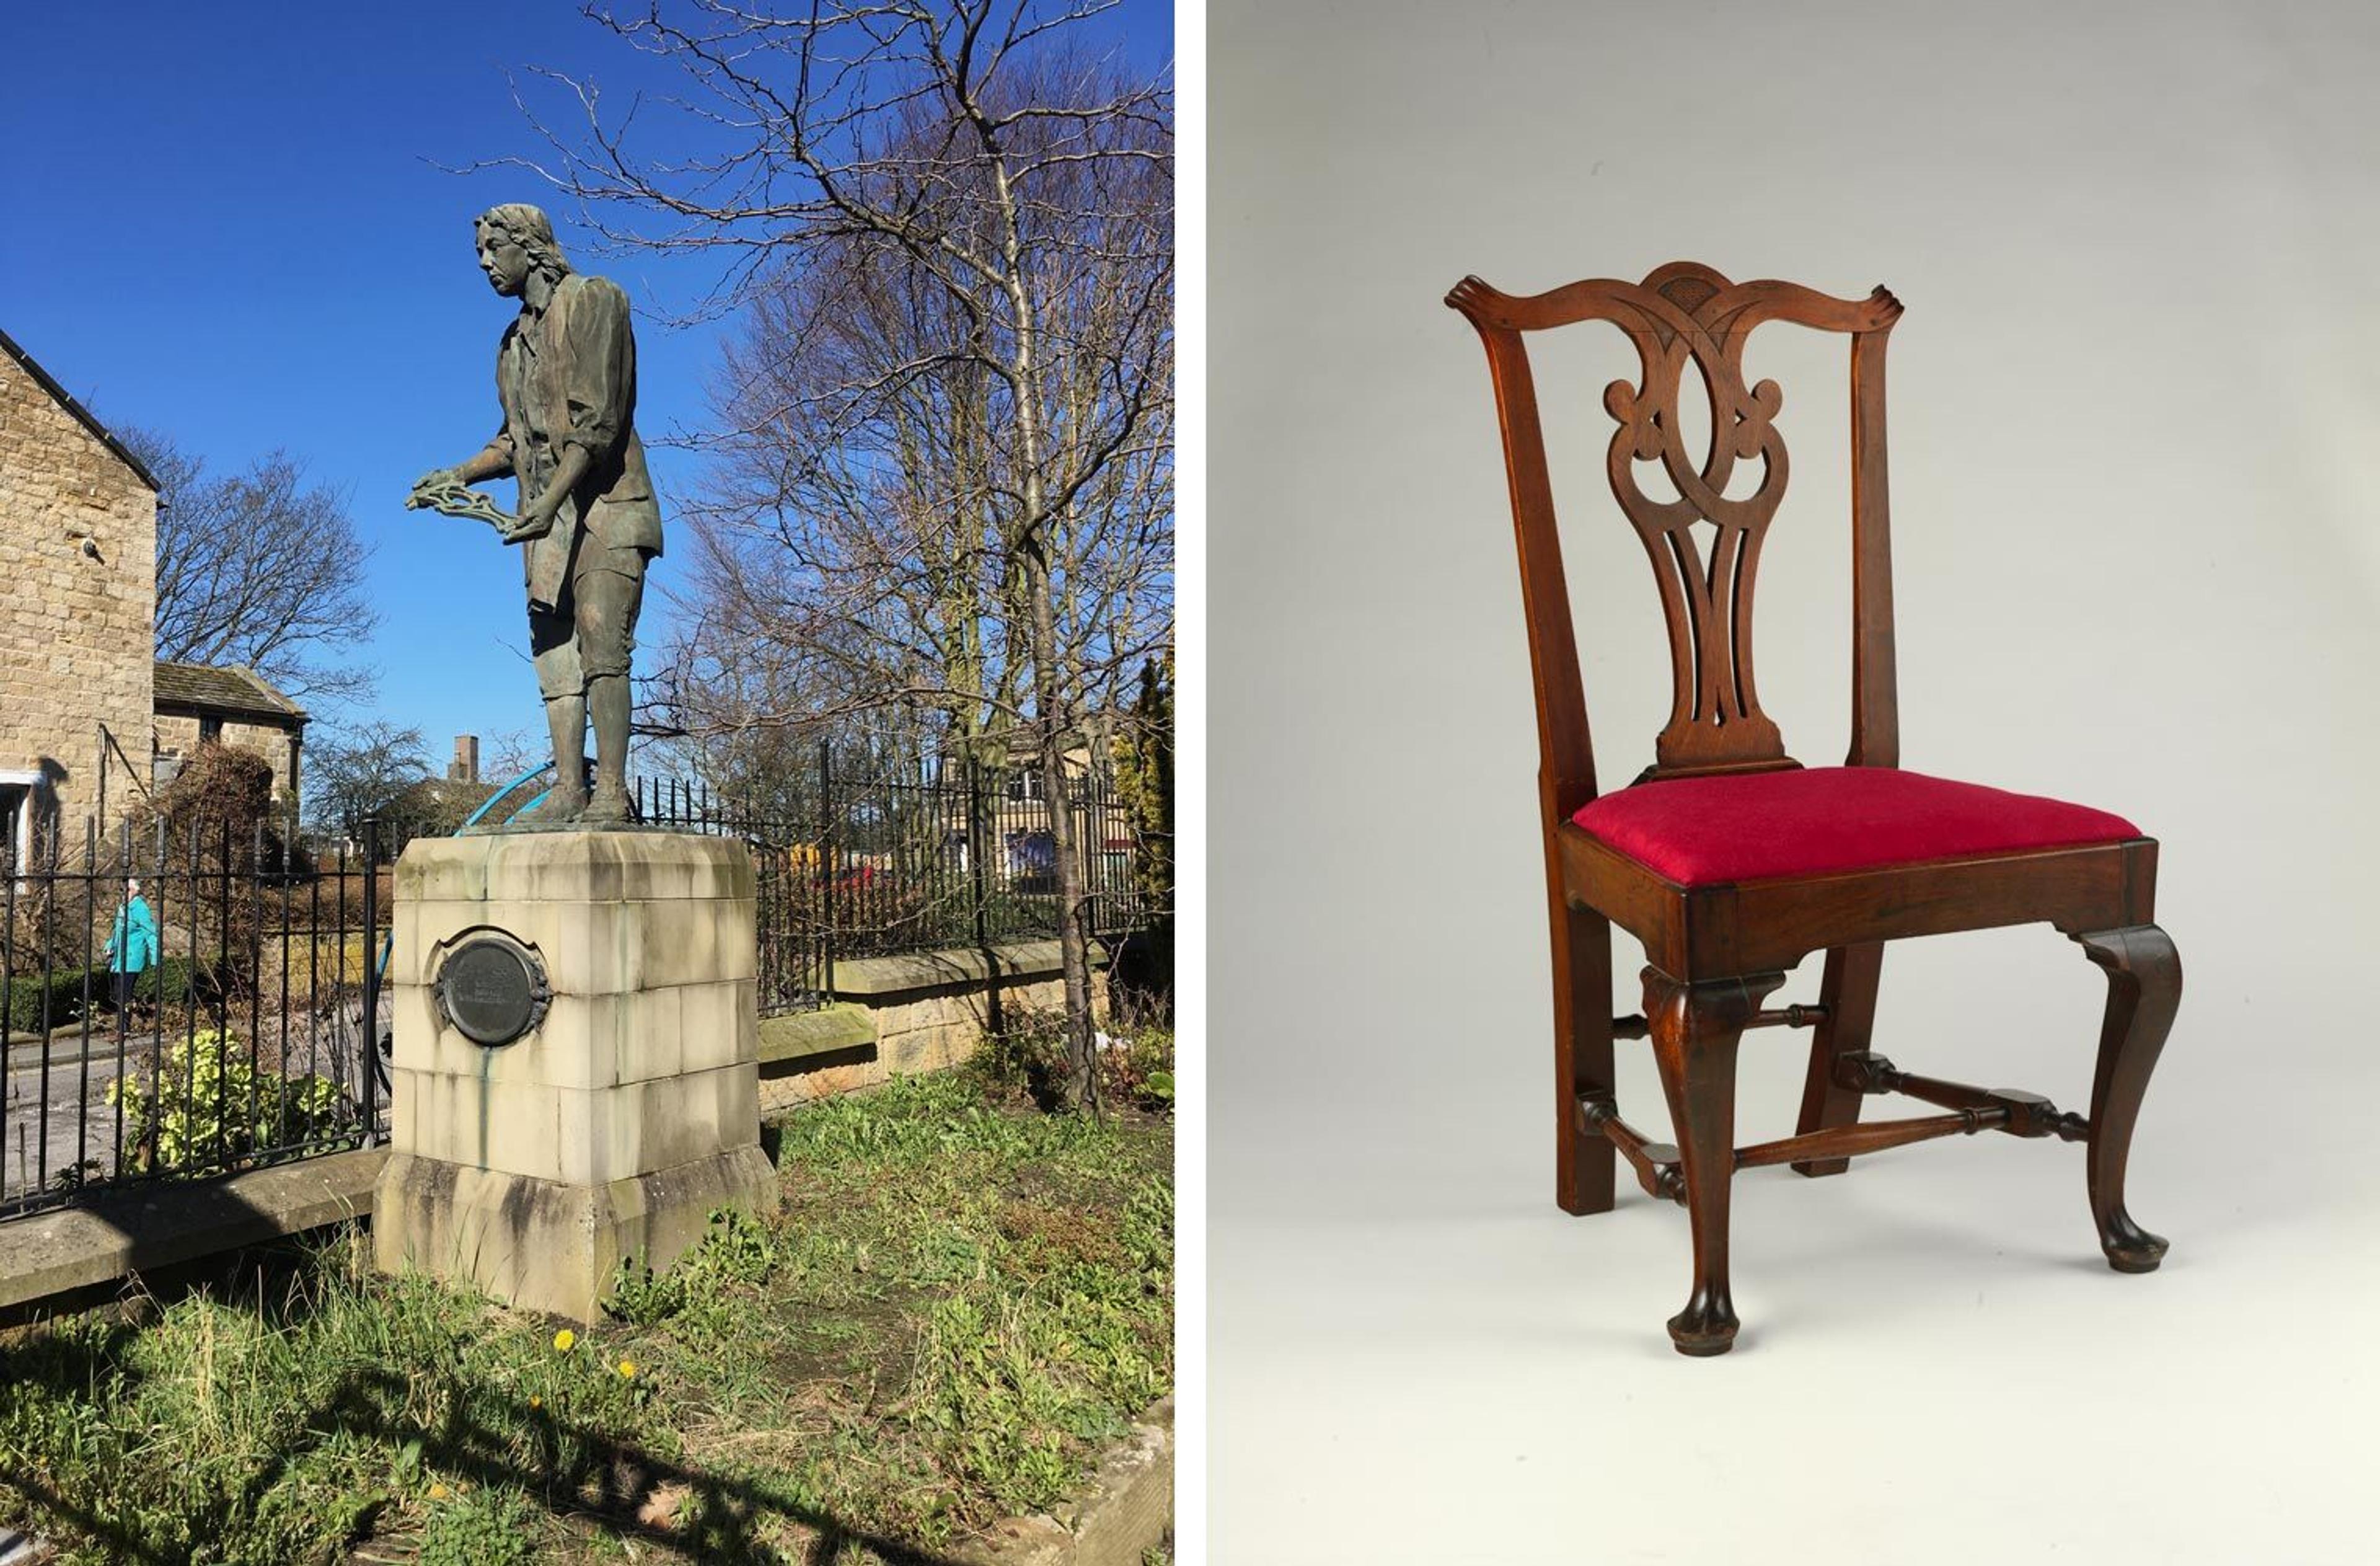 At left, a view of the Thomas Chippendale statue in Ortley, England. At right, an upholstered side chair by John Townsend